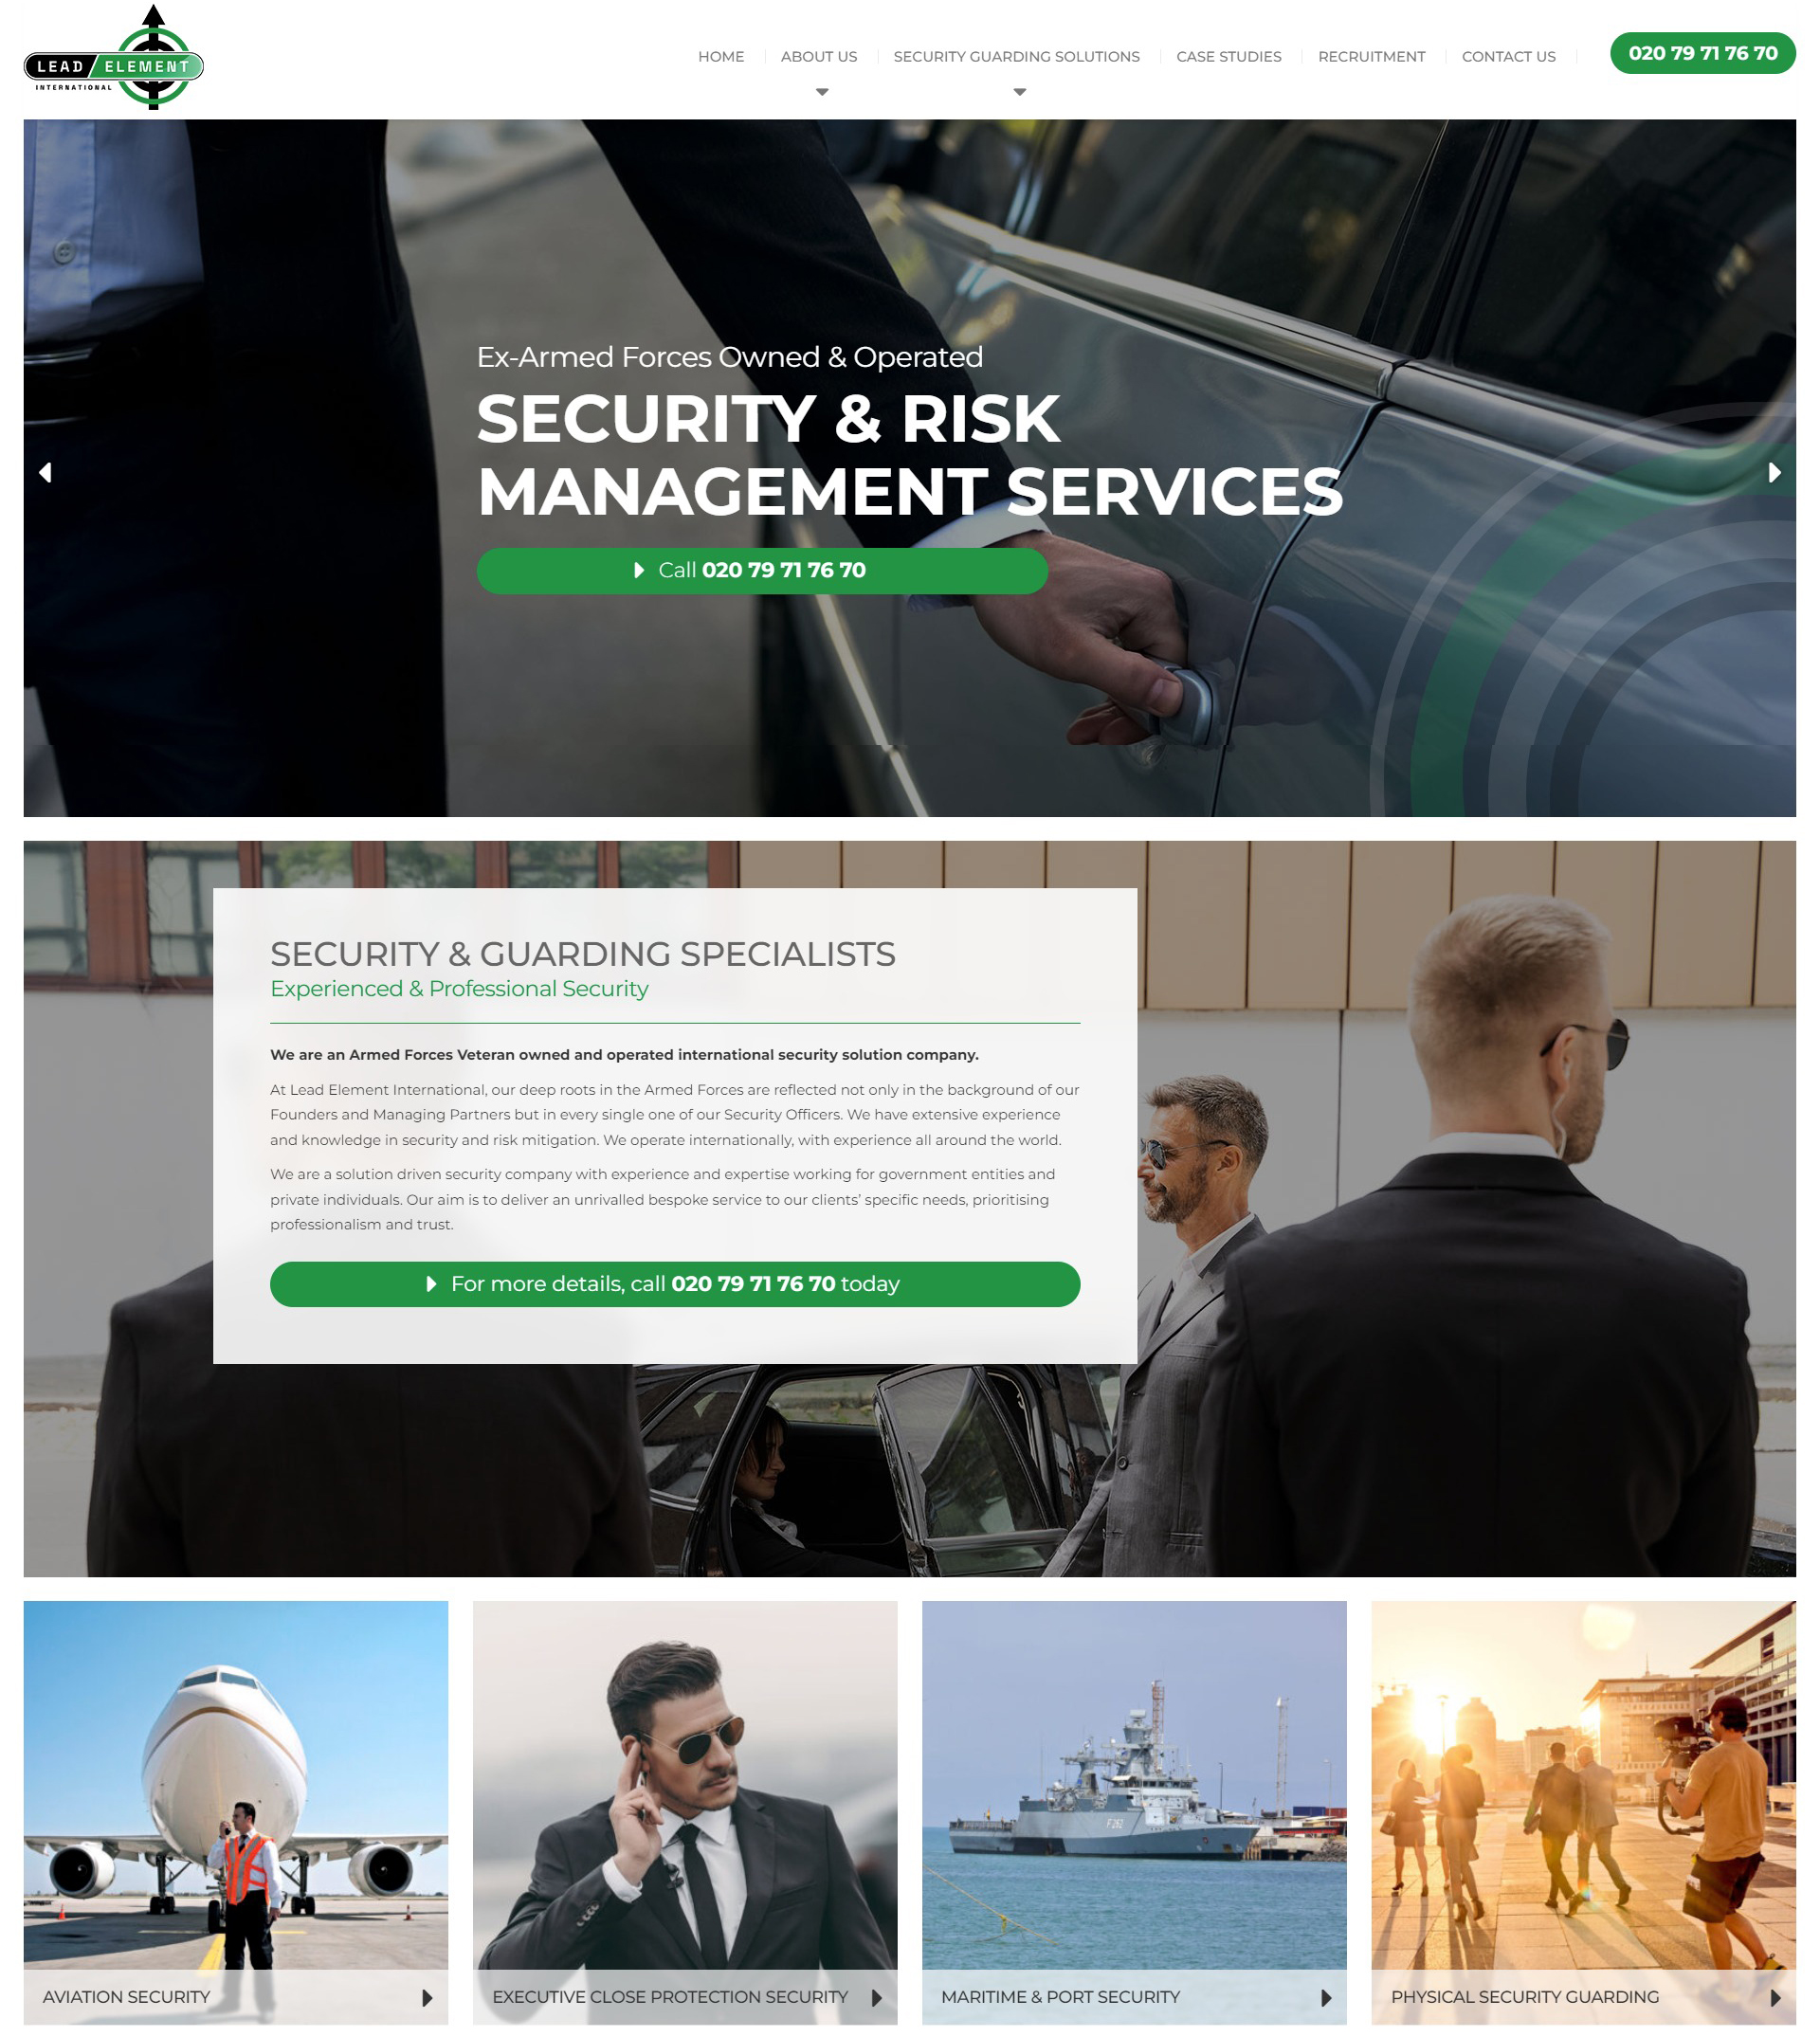 Lead Element International Security Services [city]